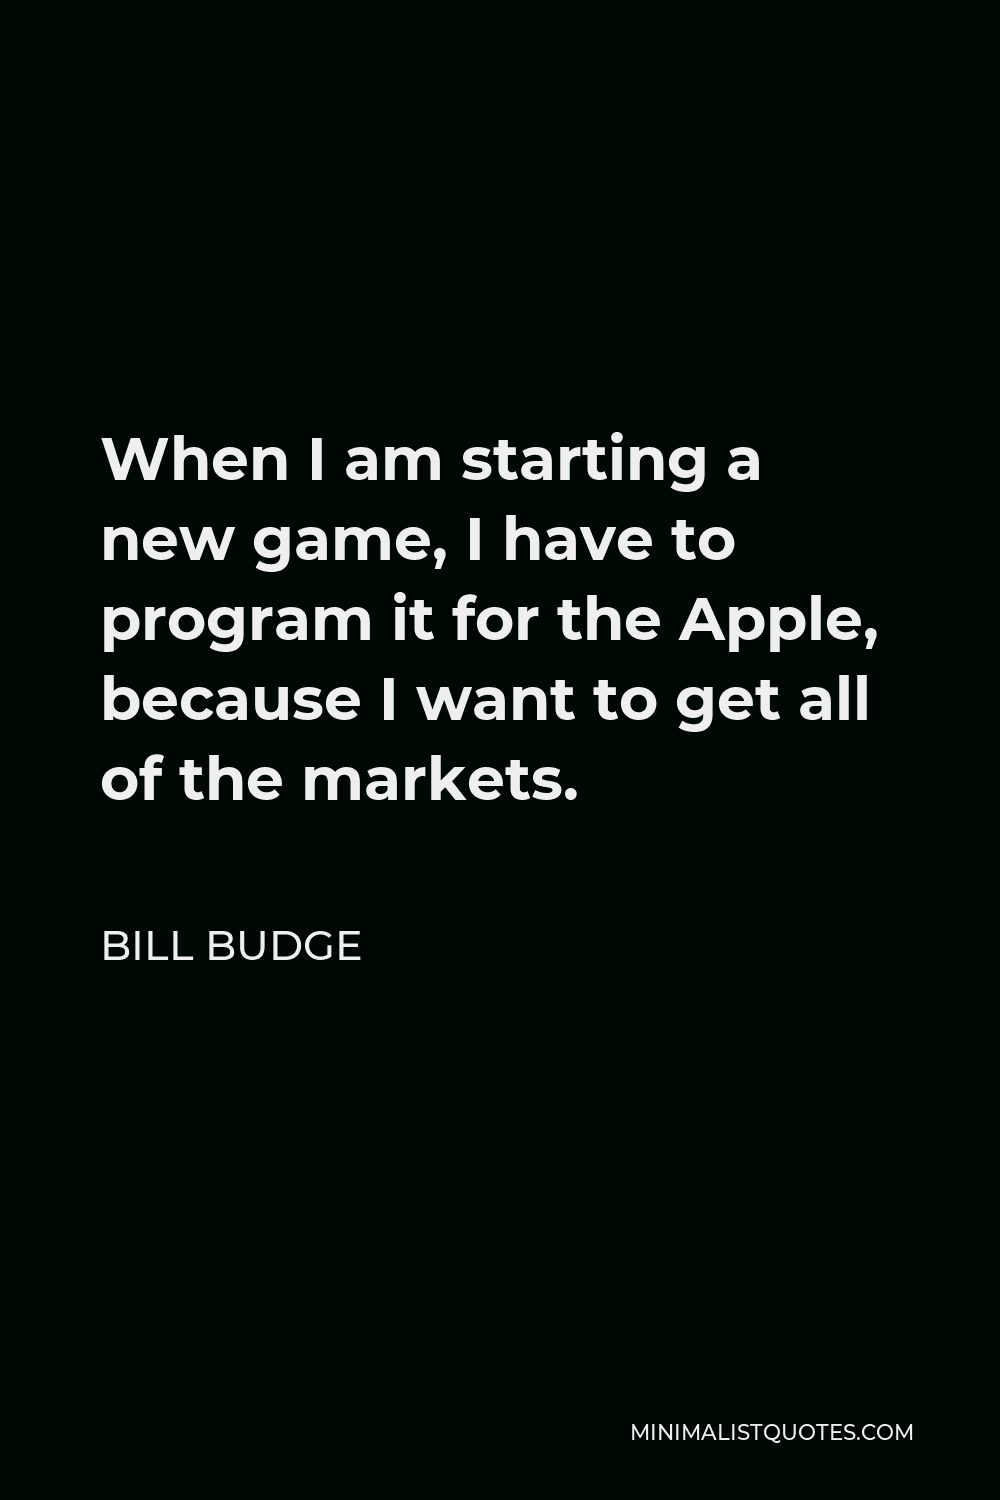 Bill Budge Quote - When I am starting a new game, I have to program it for the Apple, because I want to get all of the markets.